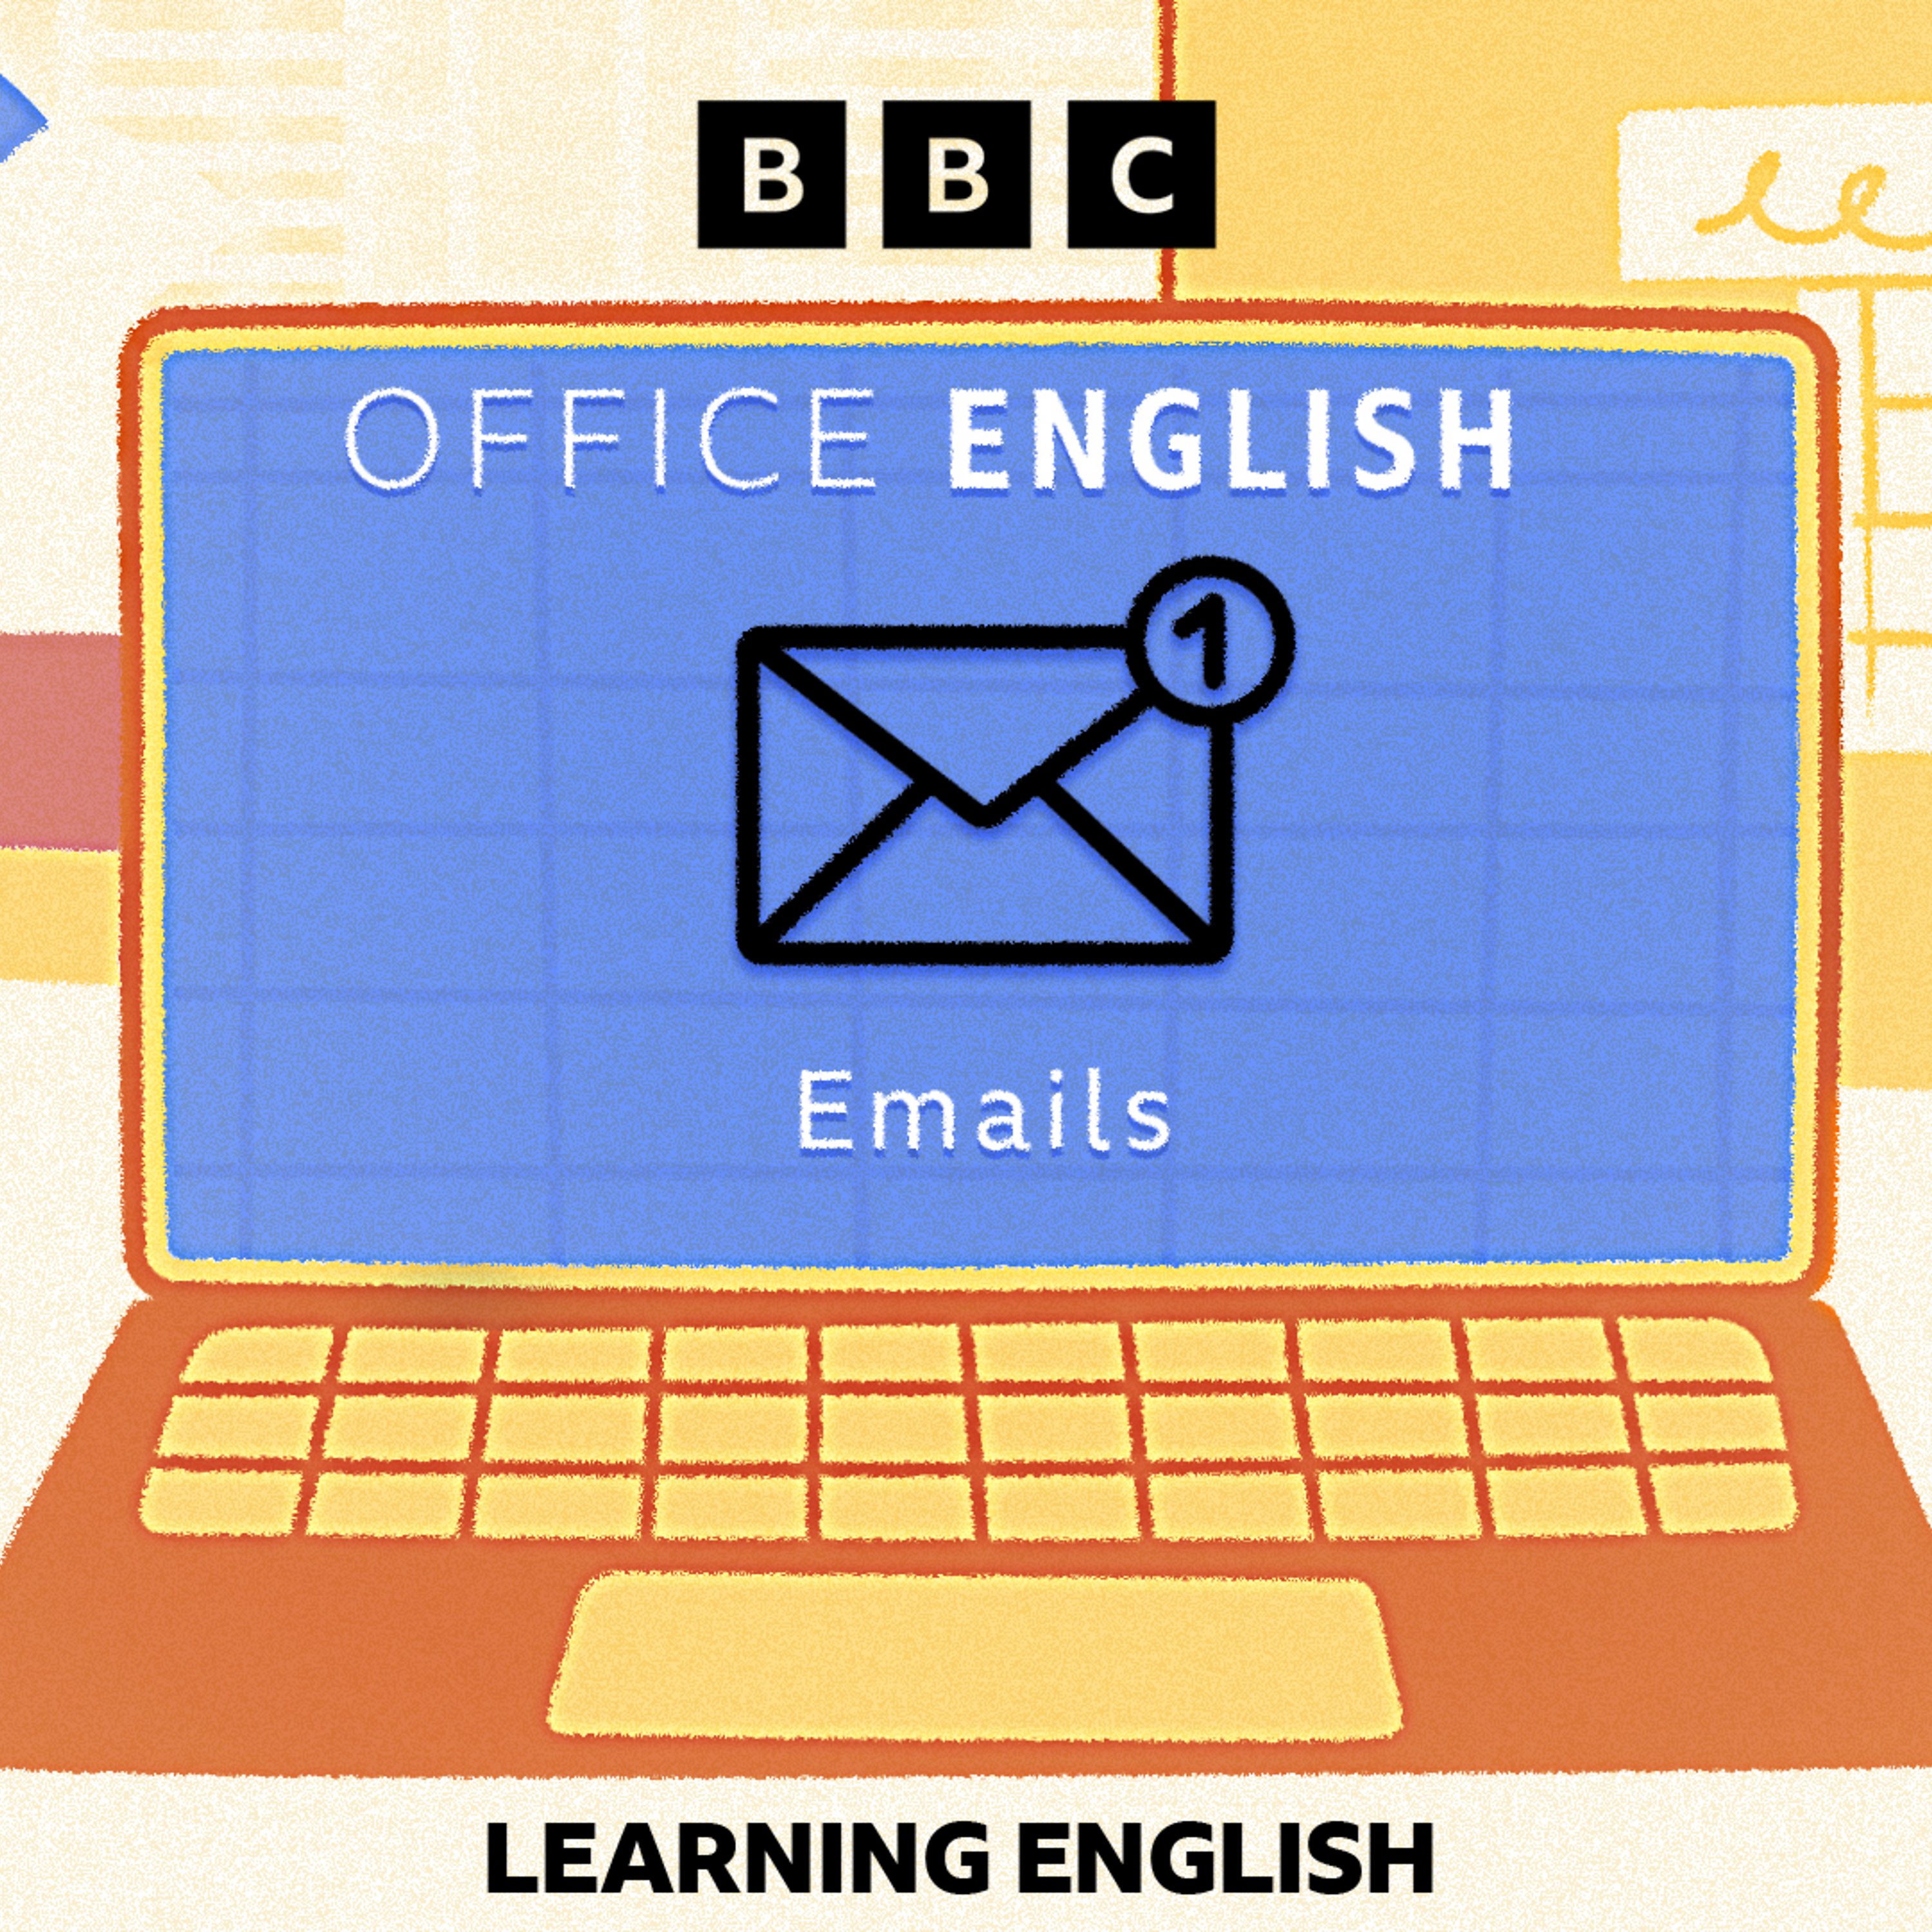 Office English: Emails